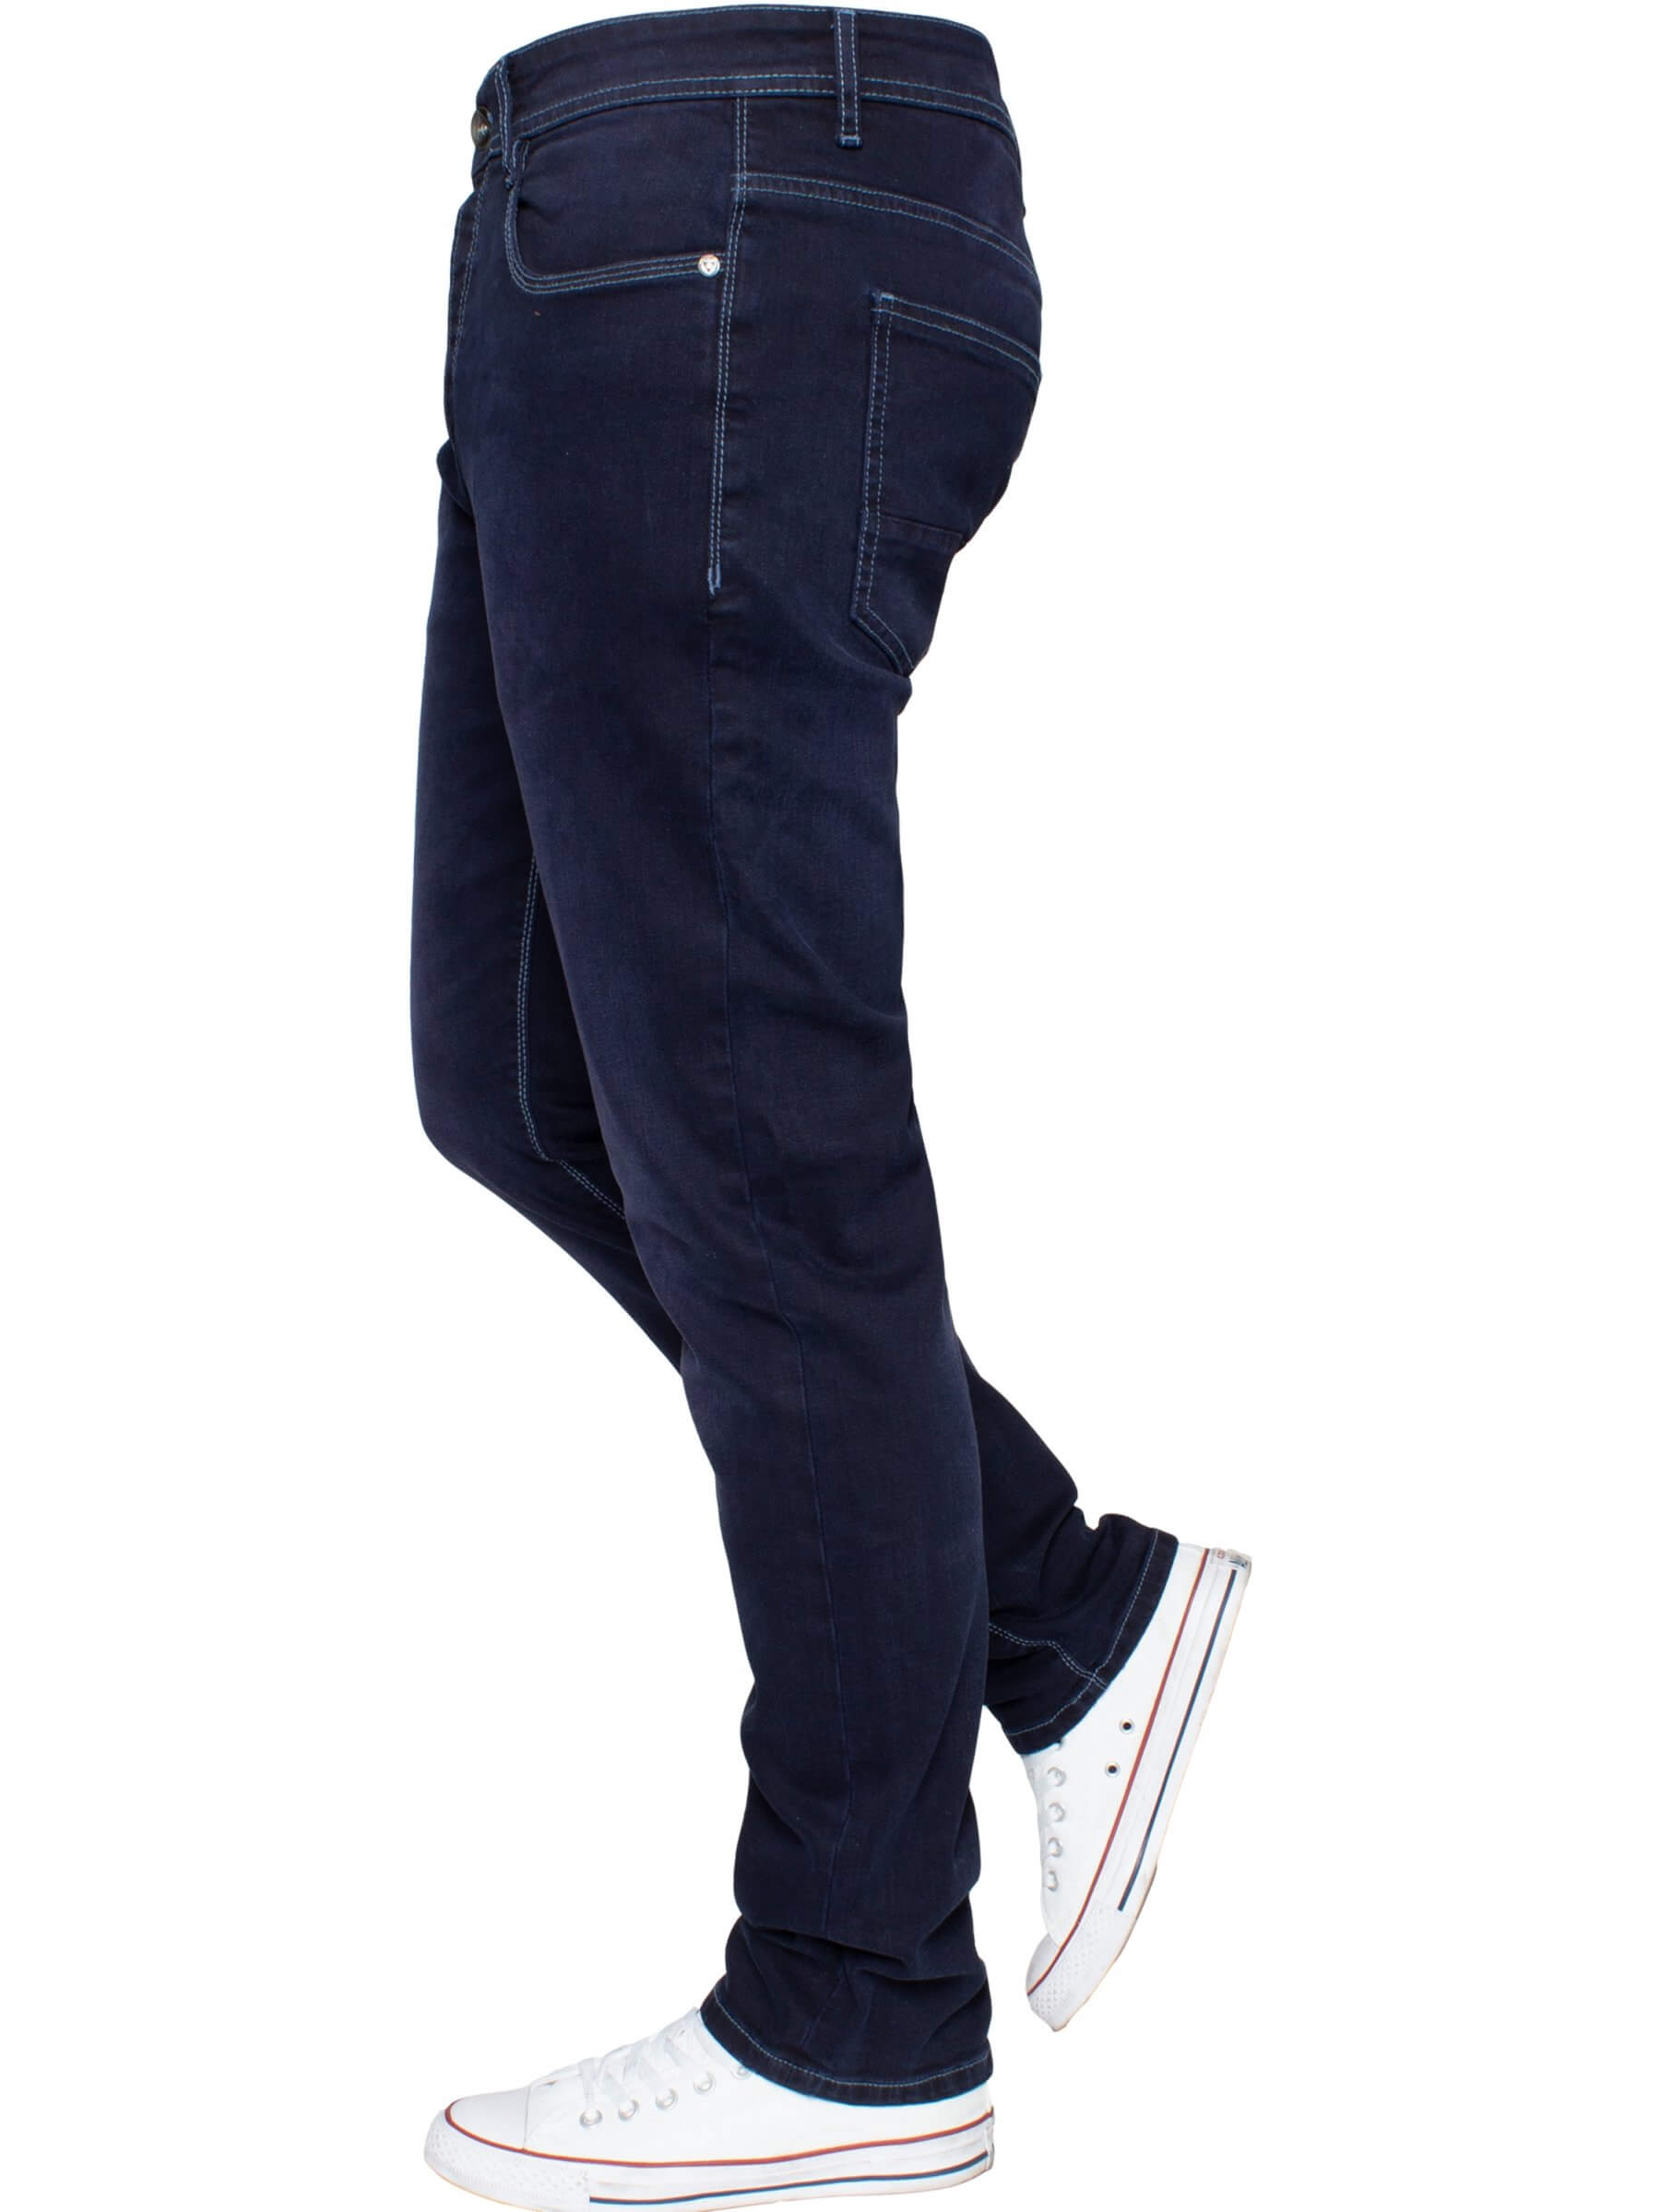 EM538 Navy Tapered Fit Jean by Eto Jeans - Spirit Clothing